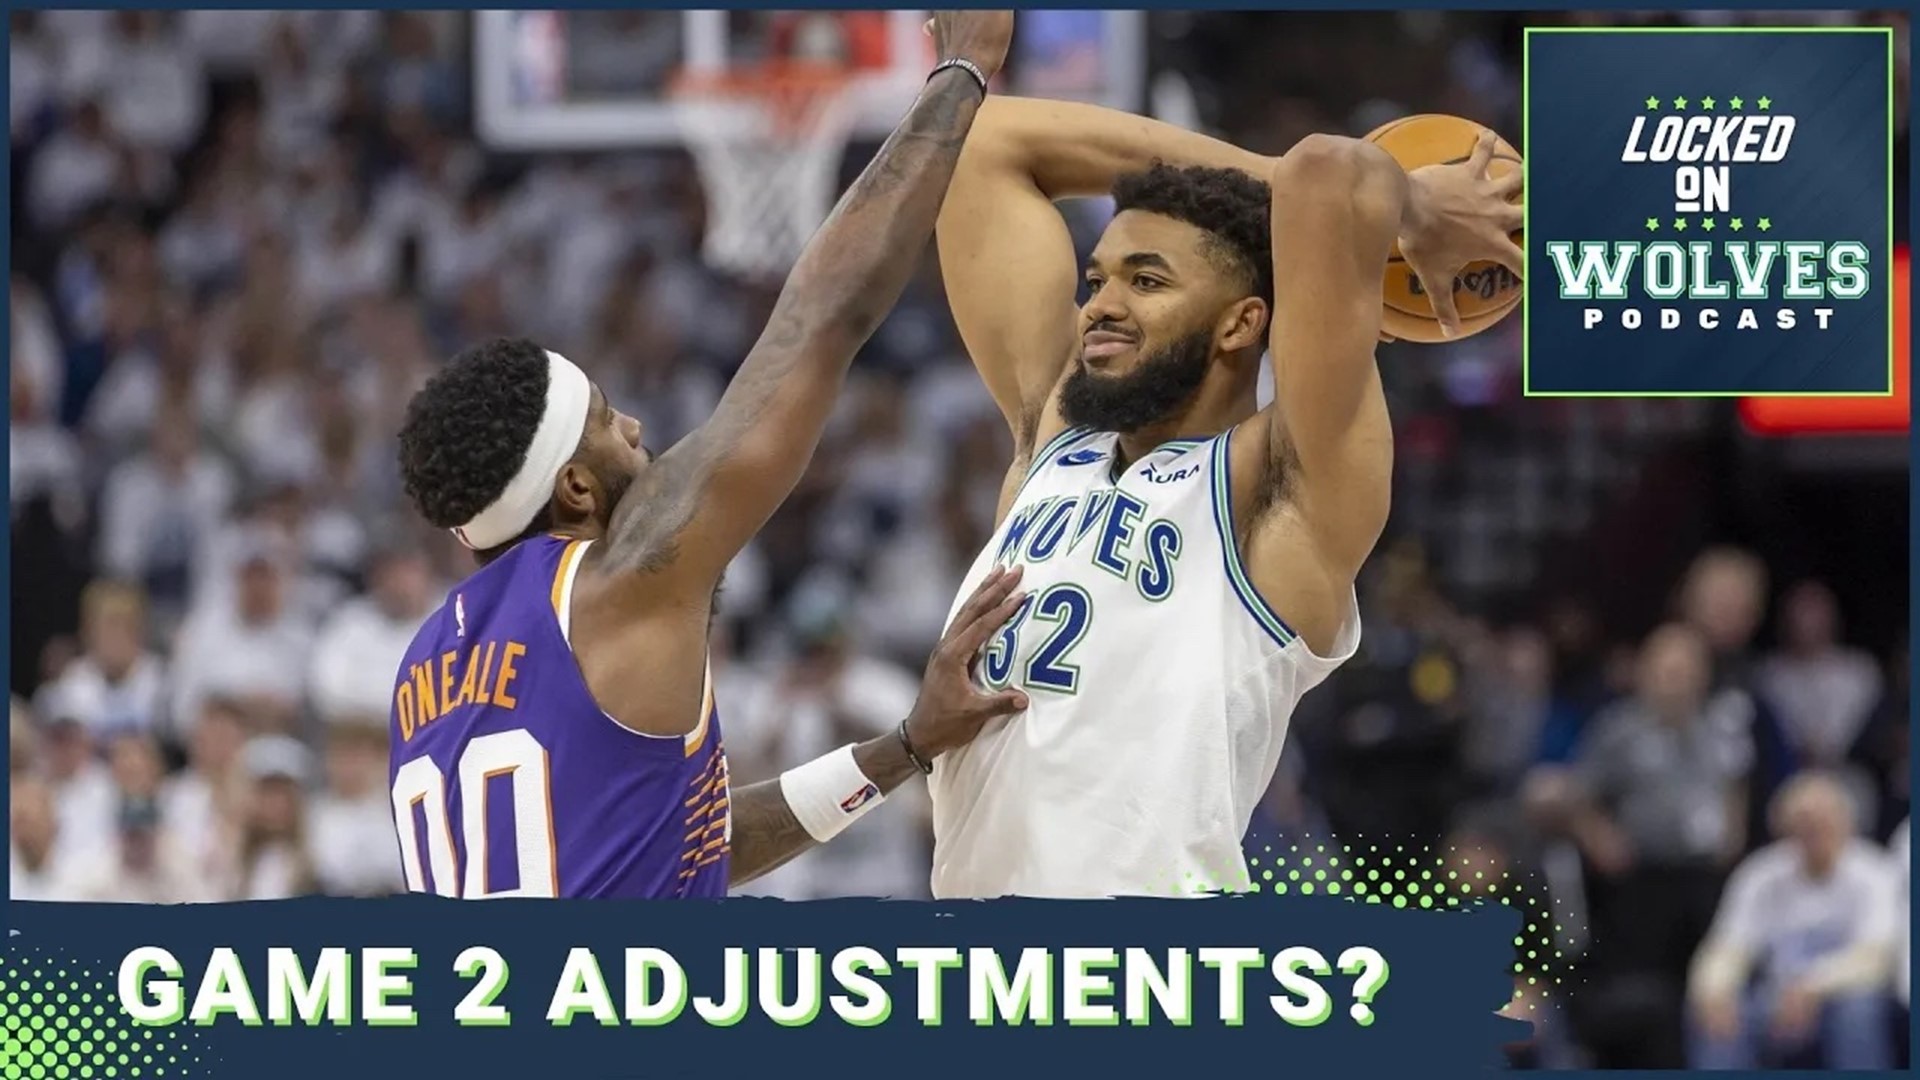 Heading into Game 2 of the first-round series between the Minnesota Timberwolves and Phoenix Suns, what adjustments can we expect each team to make?